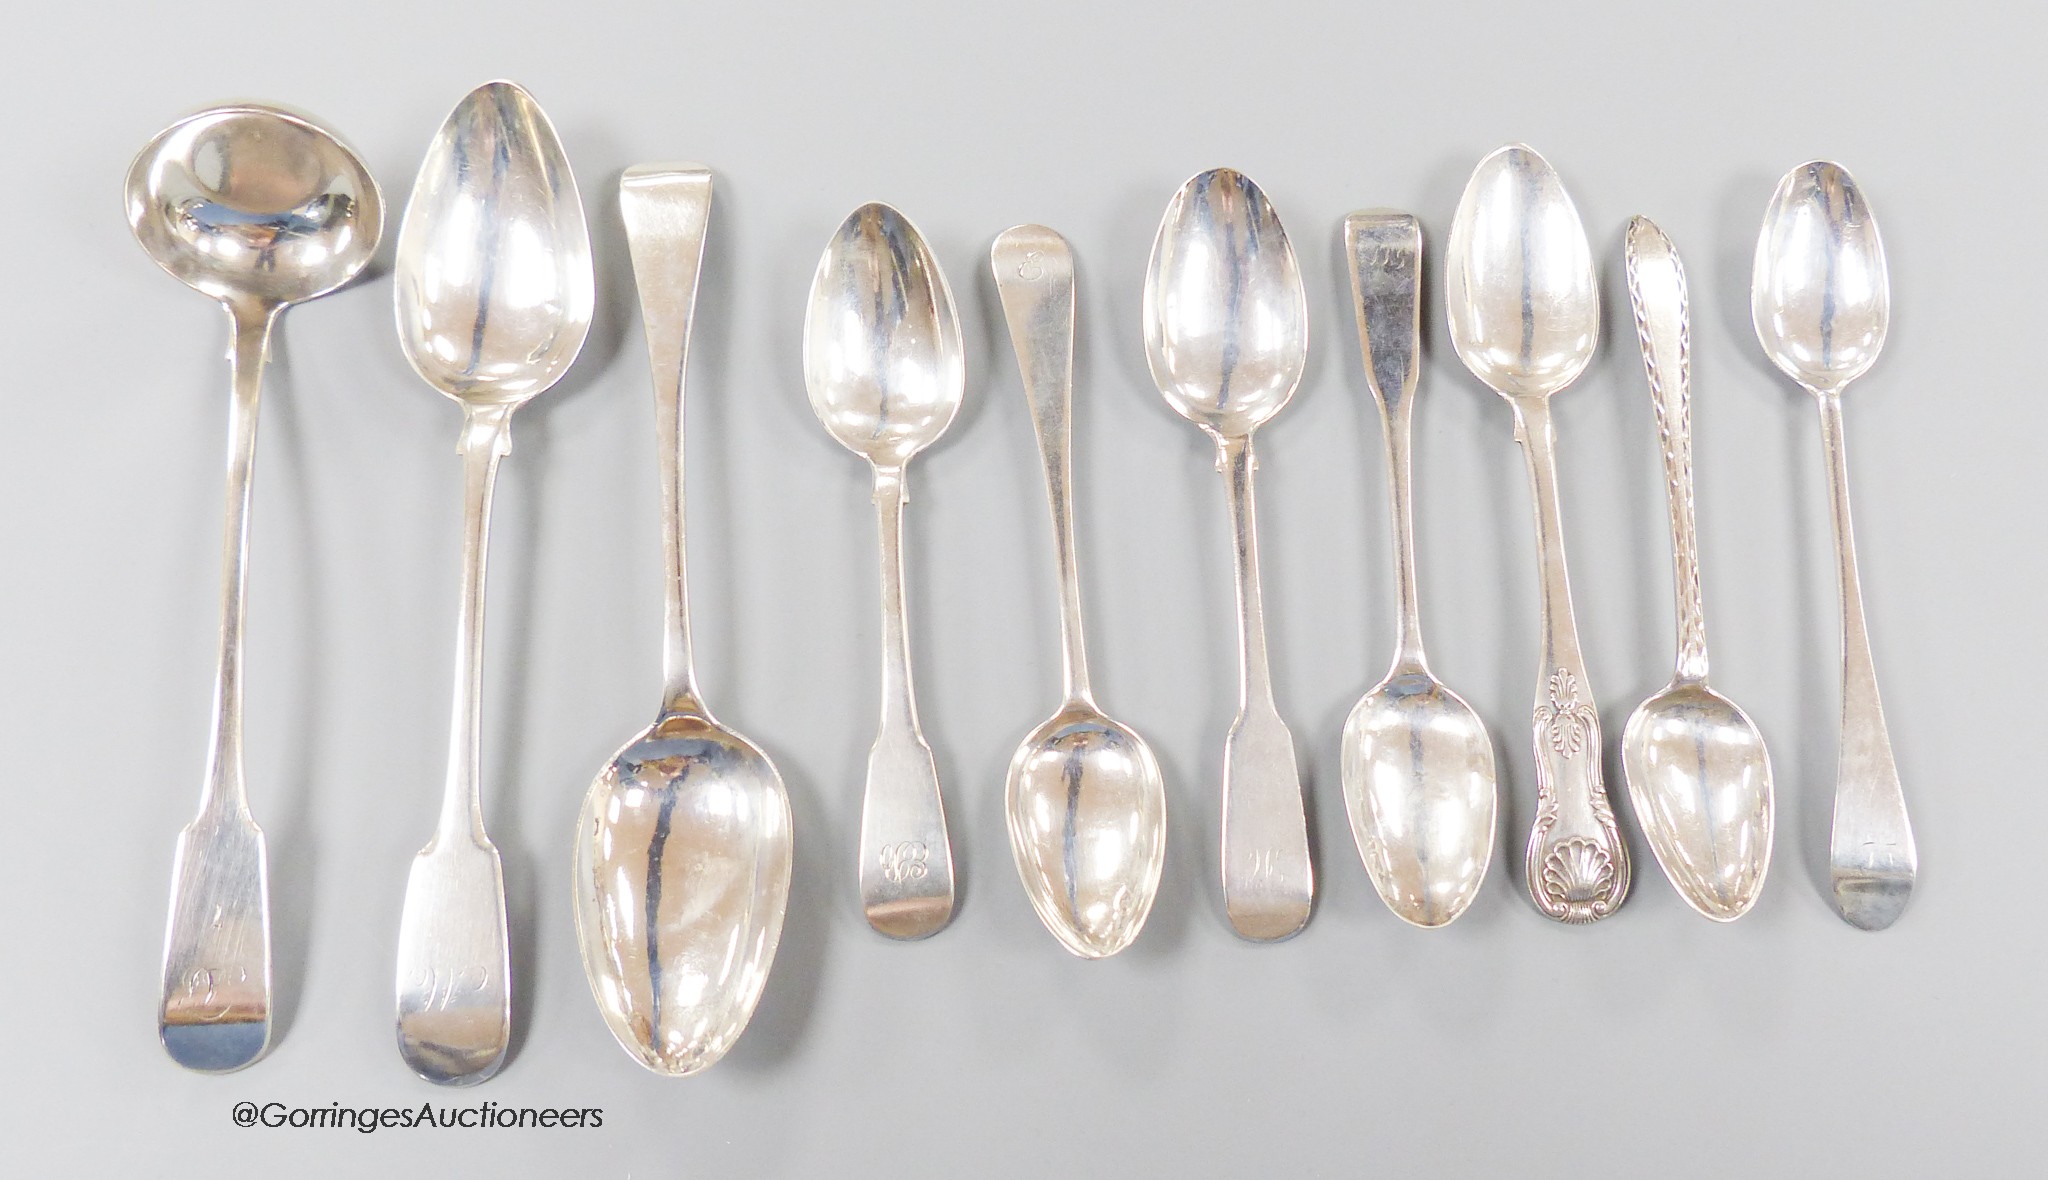 Two 19th century Scottish provincial Dundee silver dessert spoons, (William Kermath and Alexander Cameron), a toddy ladle, Alex Cameron and seven similar teaspoons, (William Constable, William Scott, Alex Cameron, David